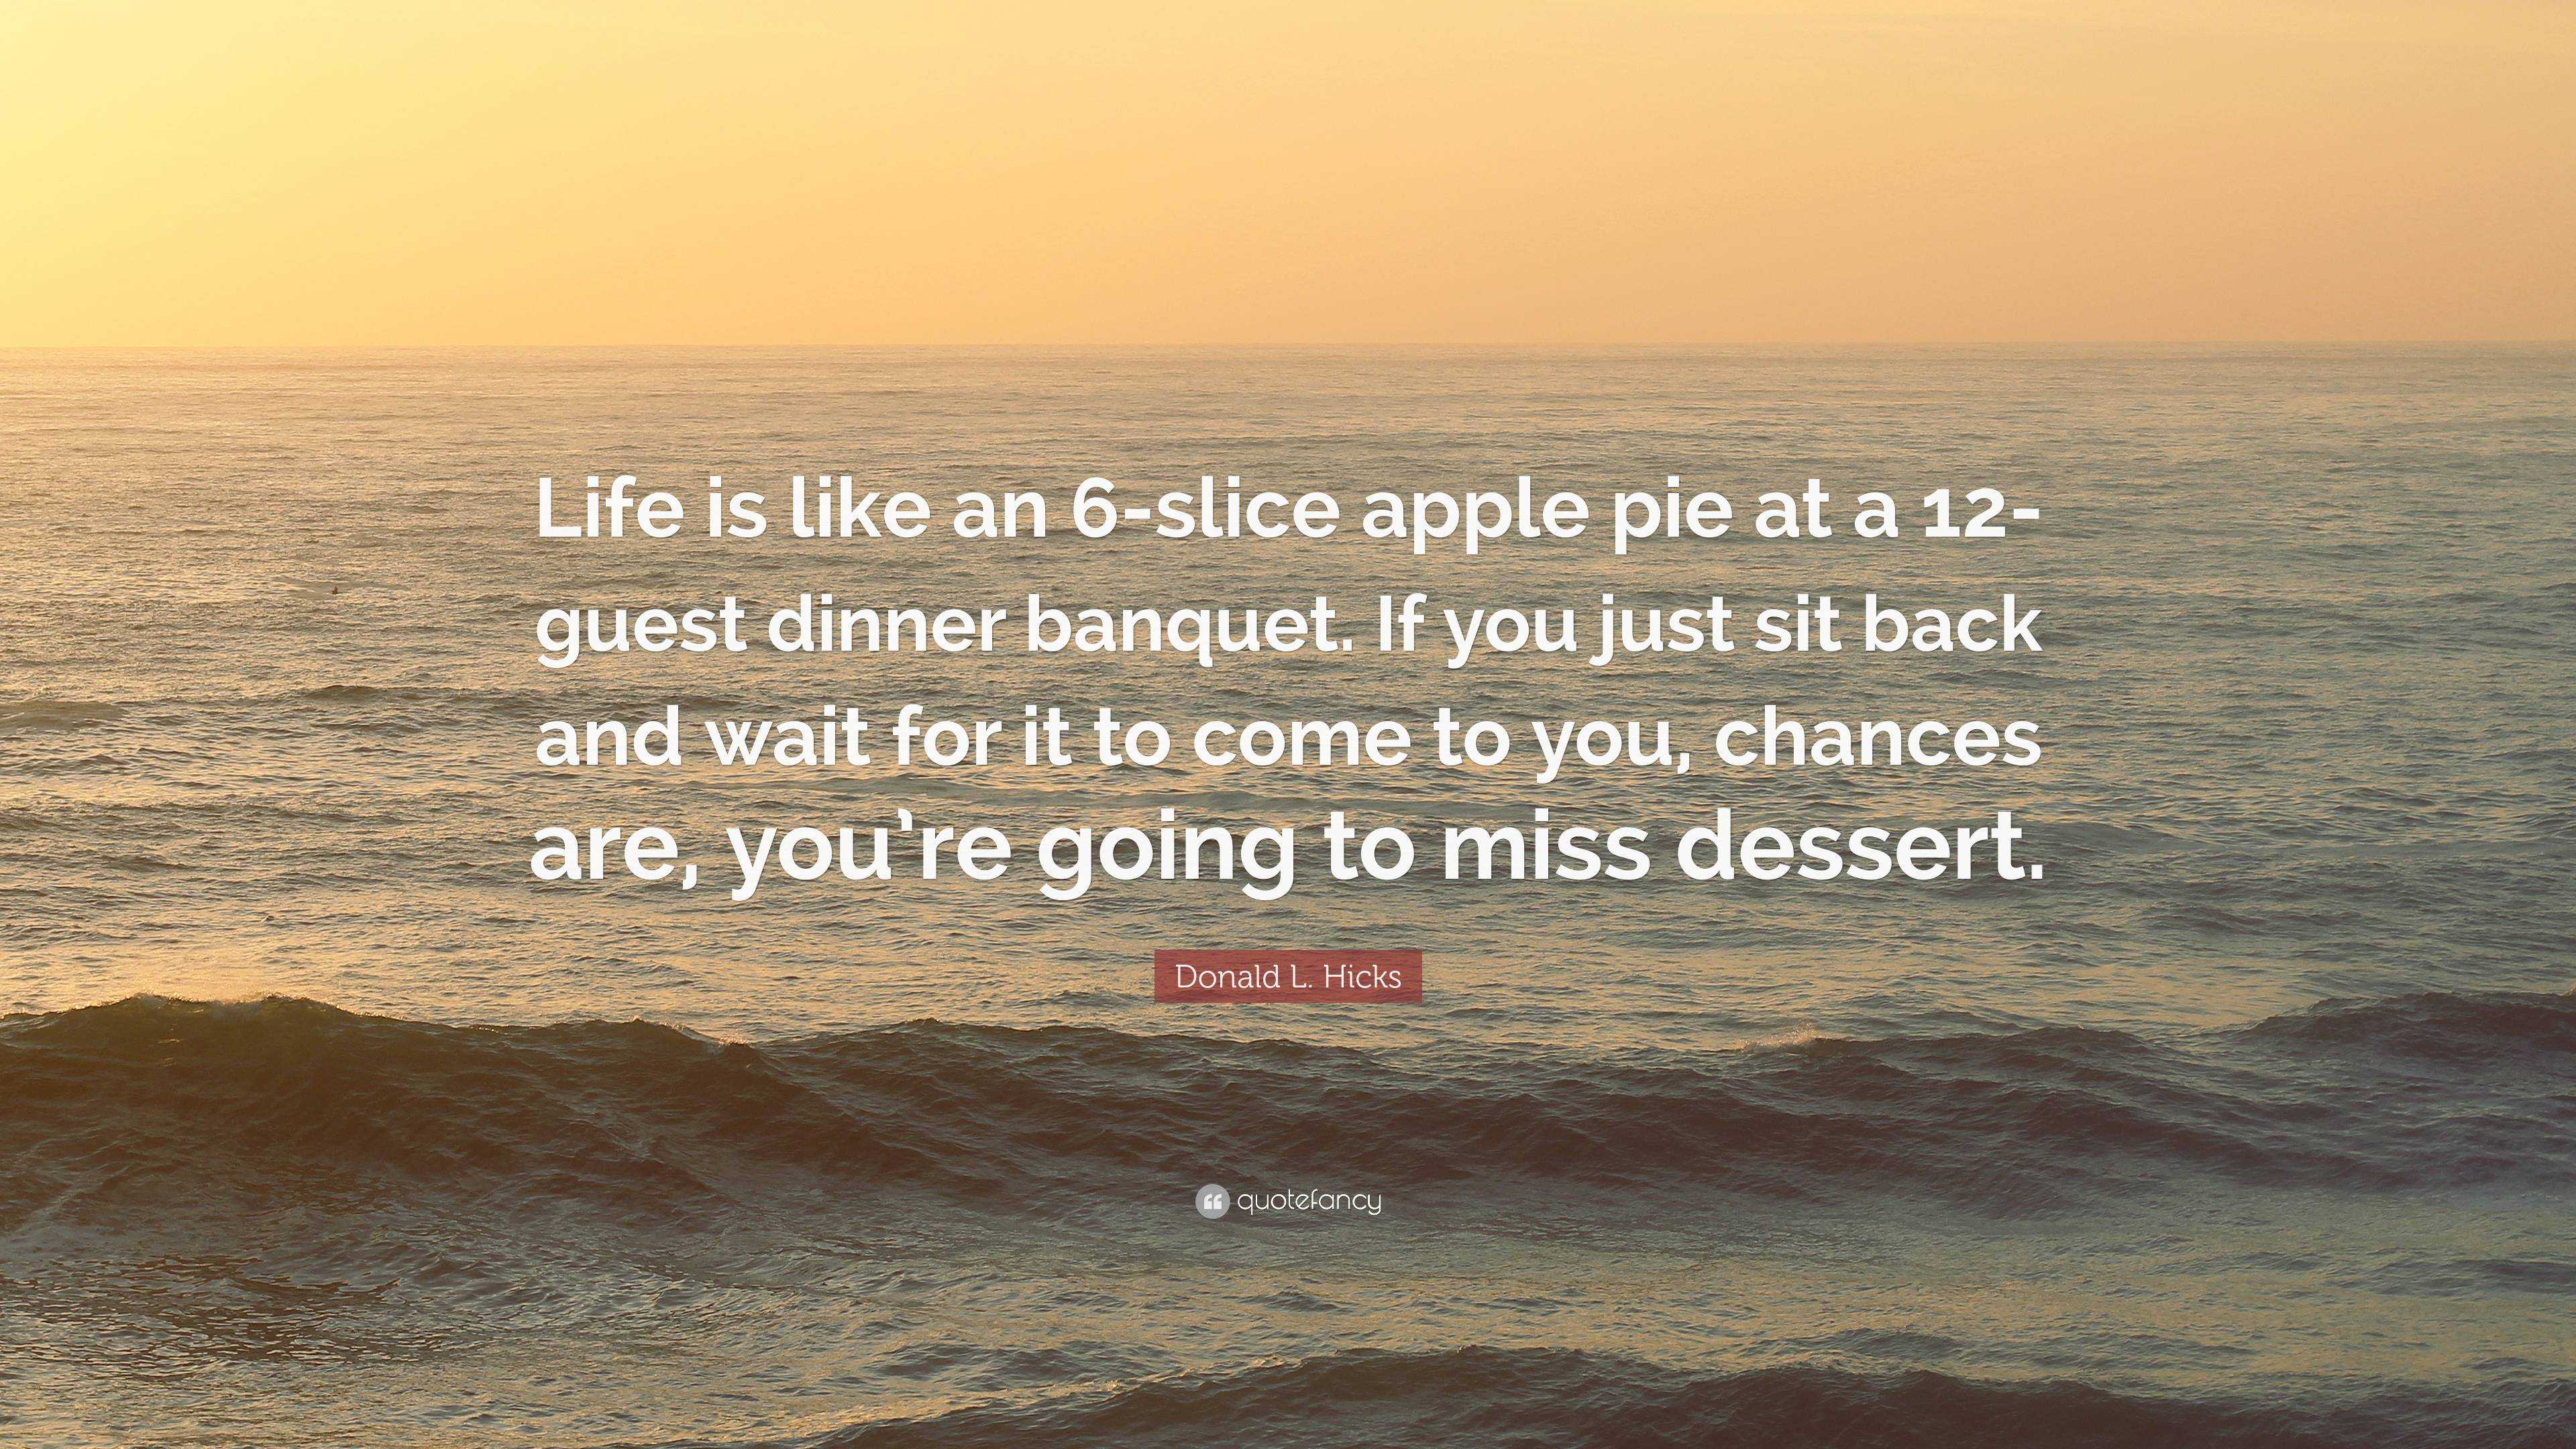 Donald L. Hicks Quote: “Life is like an 6-slice apple pie at a 12